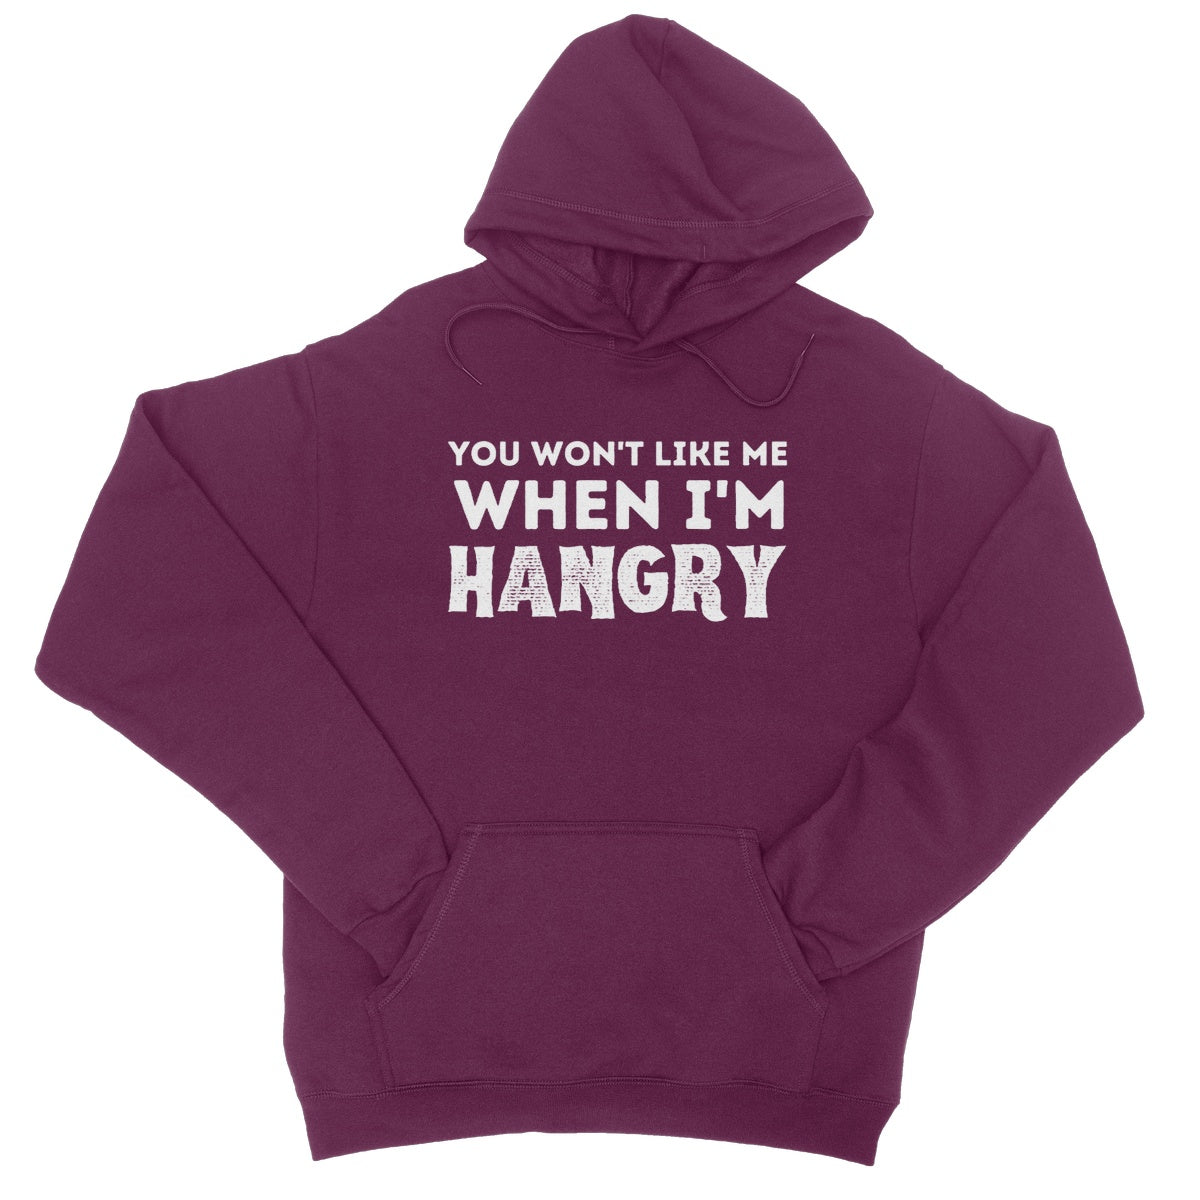 you will not like me when I am hangry hoodie burgundy